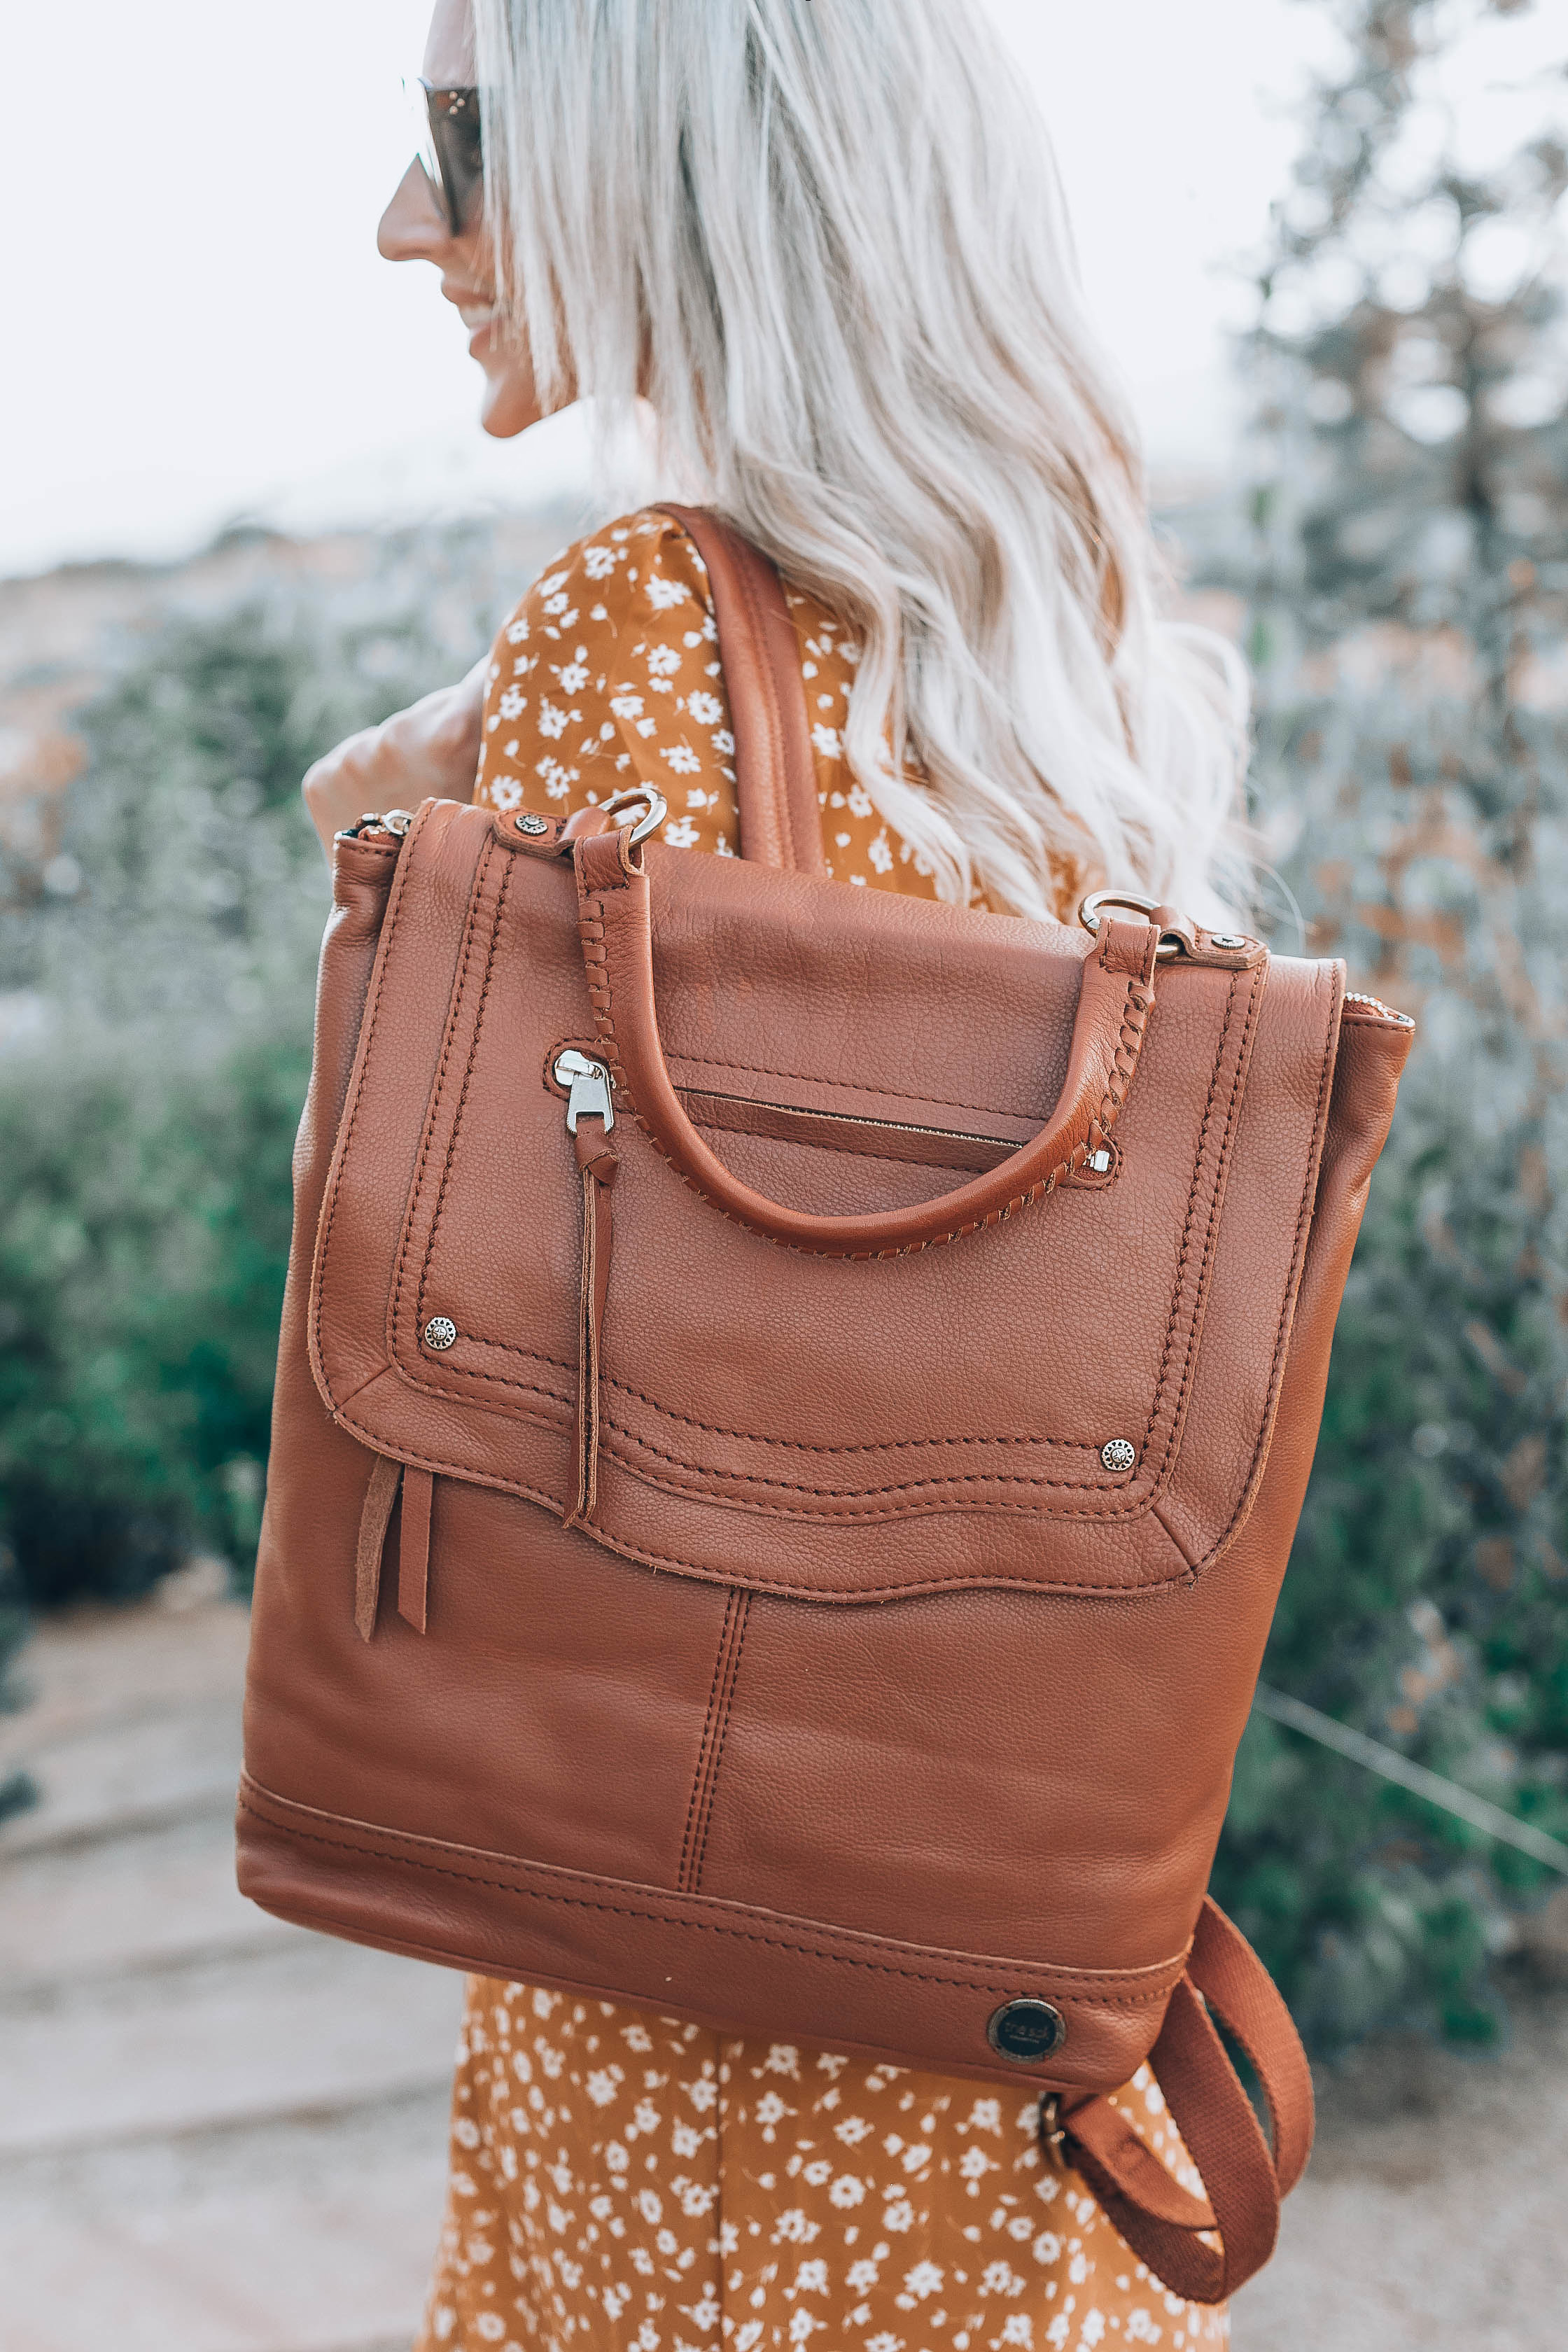 Emily Farren Wieczorek of Two Peas in a Prada talks about her go to tote for fall, the Tahoe Backpack by the Sak via Zappos.